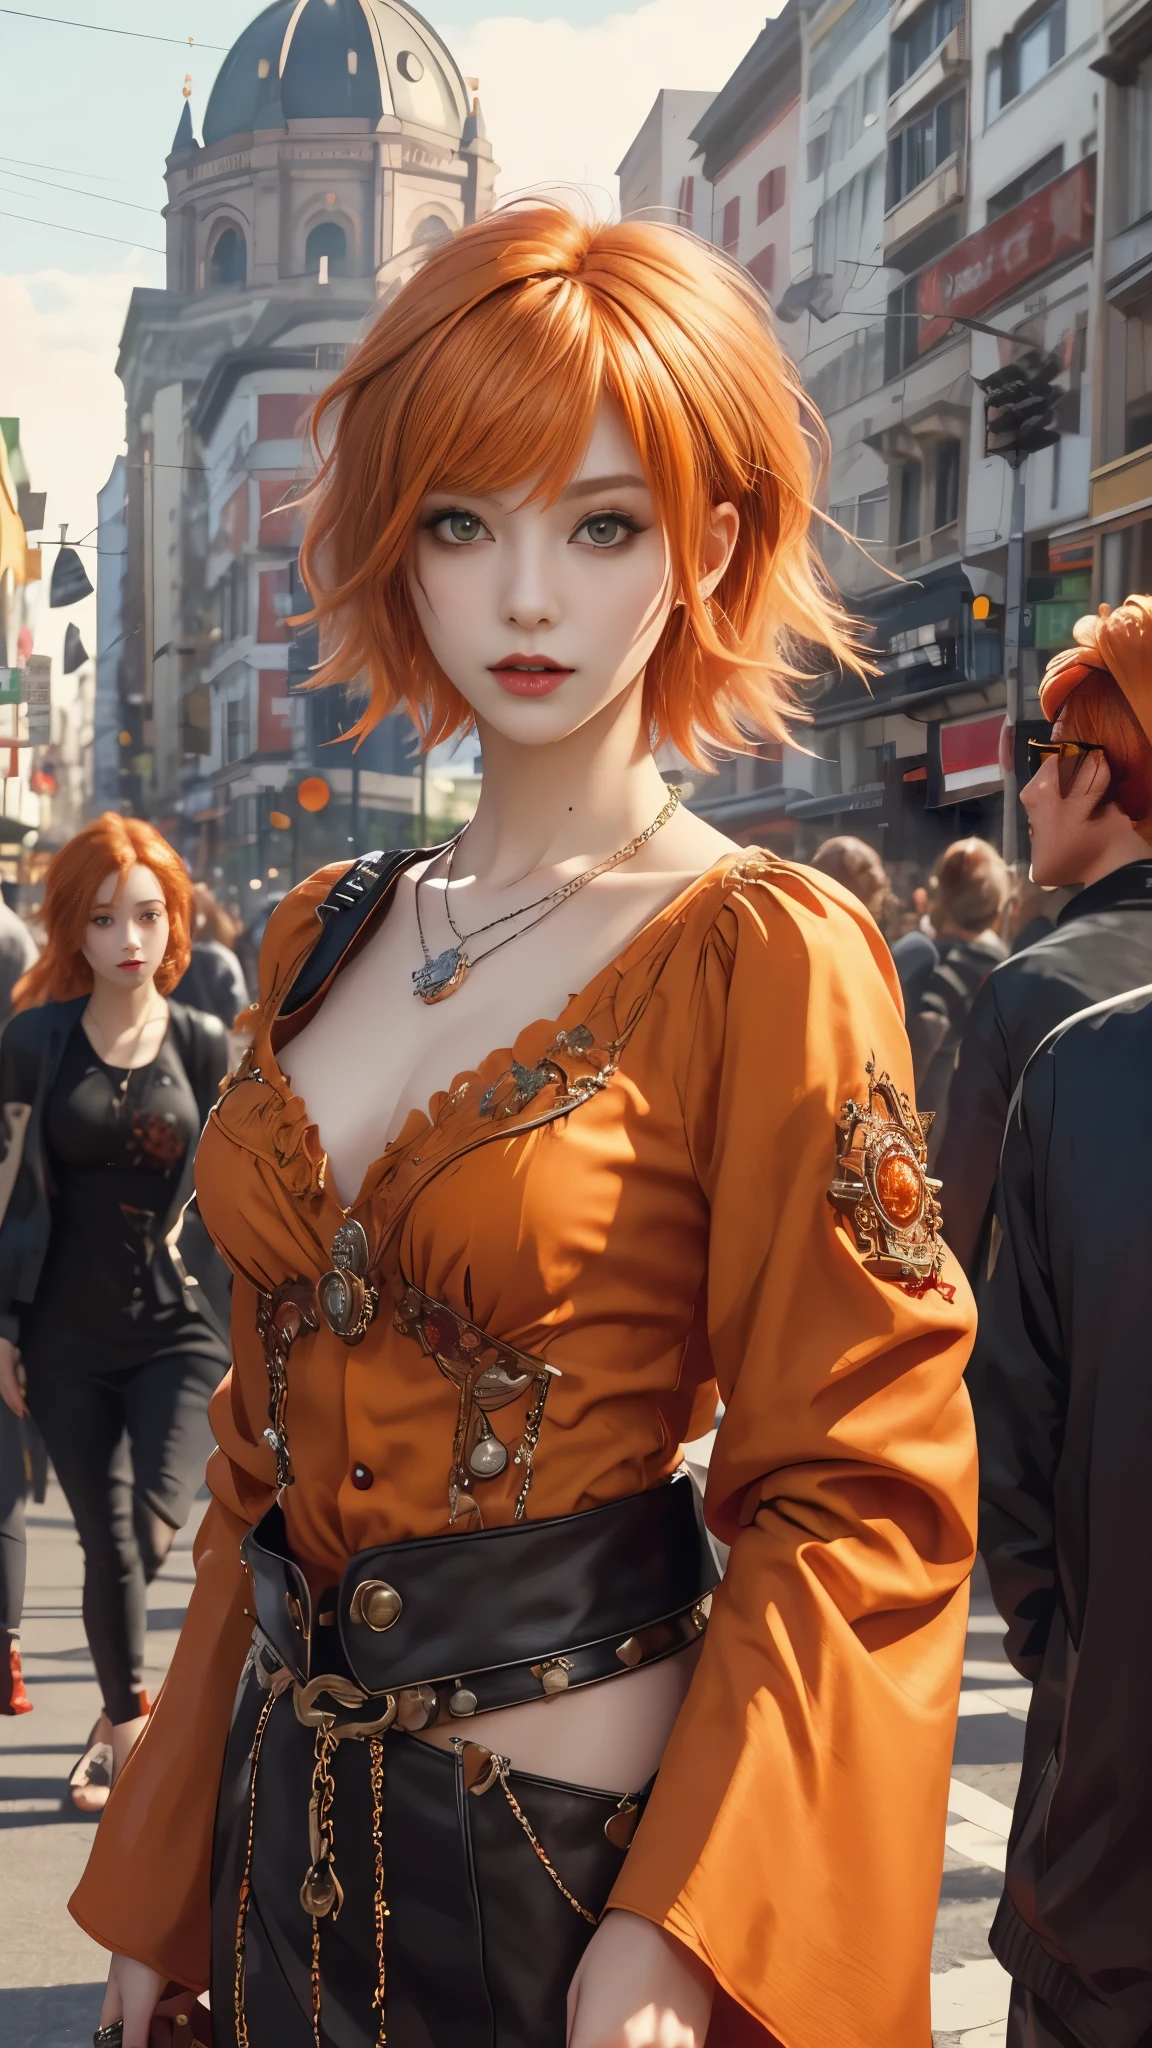 ​masterpiece, top-quality, ((1womanl)), different orange color, finely eye and detailed face, intricate detailes, Casual black and orange attire, window, A smile, Happiness, tenderness, high-level image quality、selfee, Beautuful Women、tall、a small face, D-cups, The upper part of the body、nightfall, nighttime scene、𝓡𝓸𝓶𝓪𝓷𝓽𝓲𝓬、Korea person, Idol Photos, Model photo, k pop, Professional Photos, Vampires, Korean fashion in black and orange, Fedoman with necklace, inspired by Sim Sa-jeong, androgynous vampire, :9 detailed face: 8, extra detailed face, detailed punk hair, ((eyes are deialed)) baggy eyes, Seductive. Highly detailed, semi realistic anime, Vampires, hyperrealistic teen, Delicate androgynous princess, imvu, ((short hair woman)), orange hair woman with wild look, ((Woman with short orange hair)), ((1 persons)),